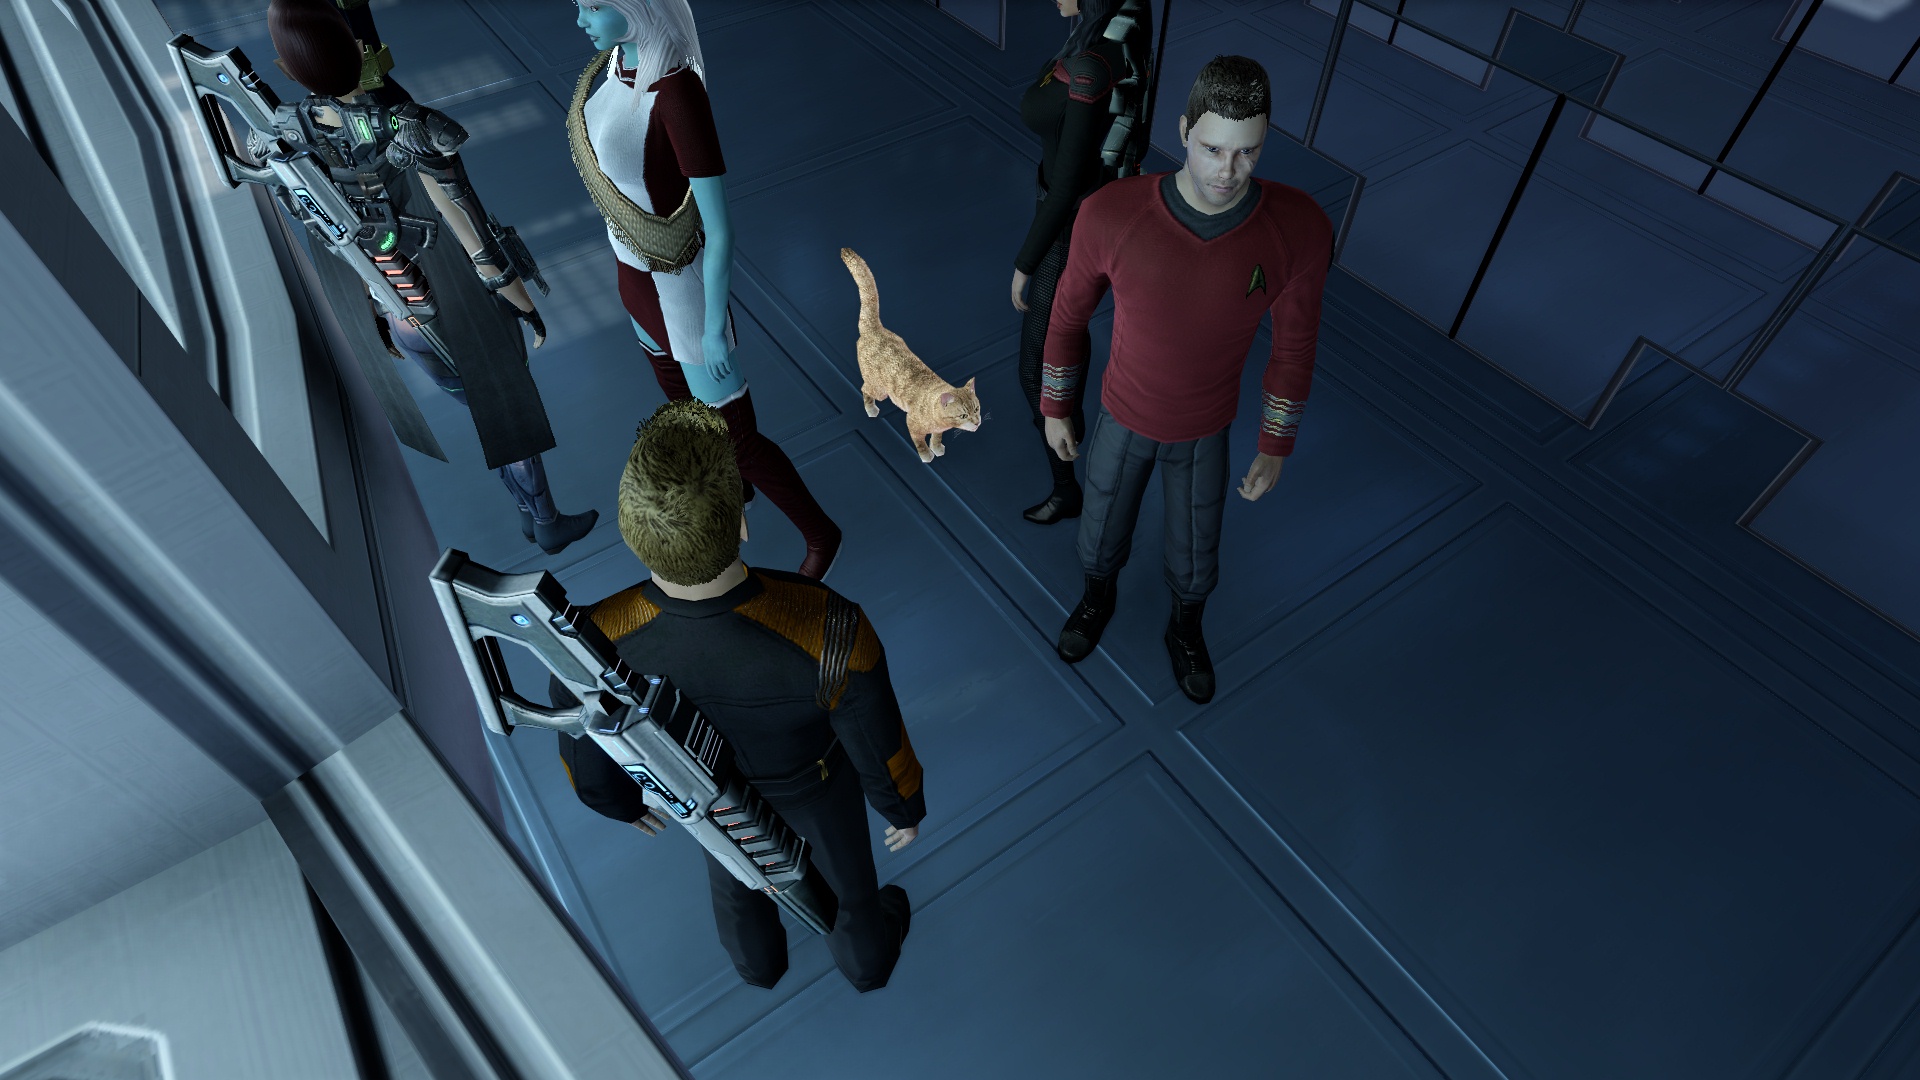 Delven McClaine finds a kitty in the academy!